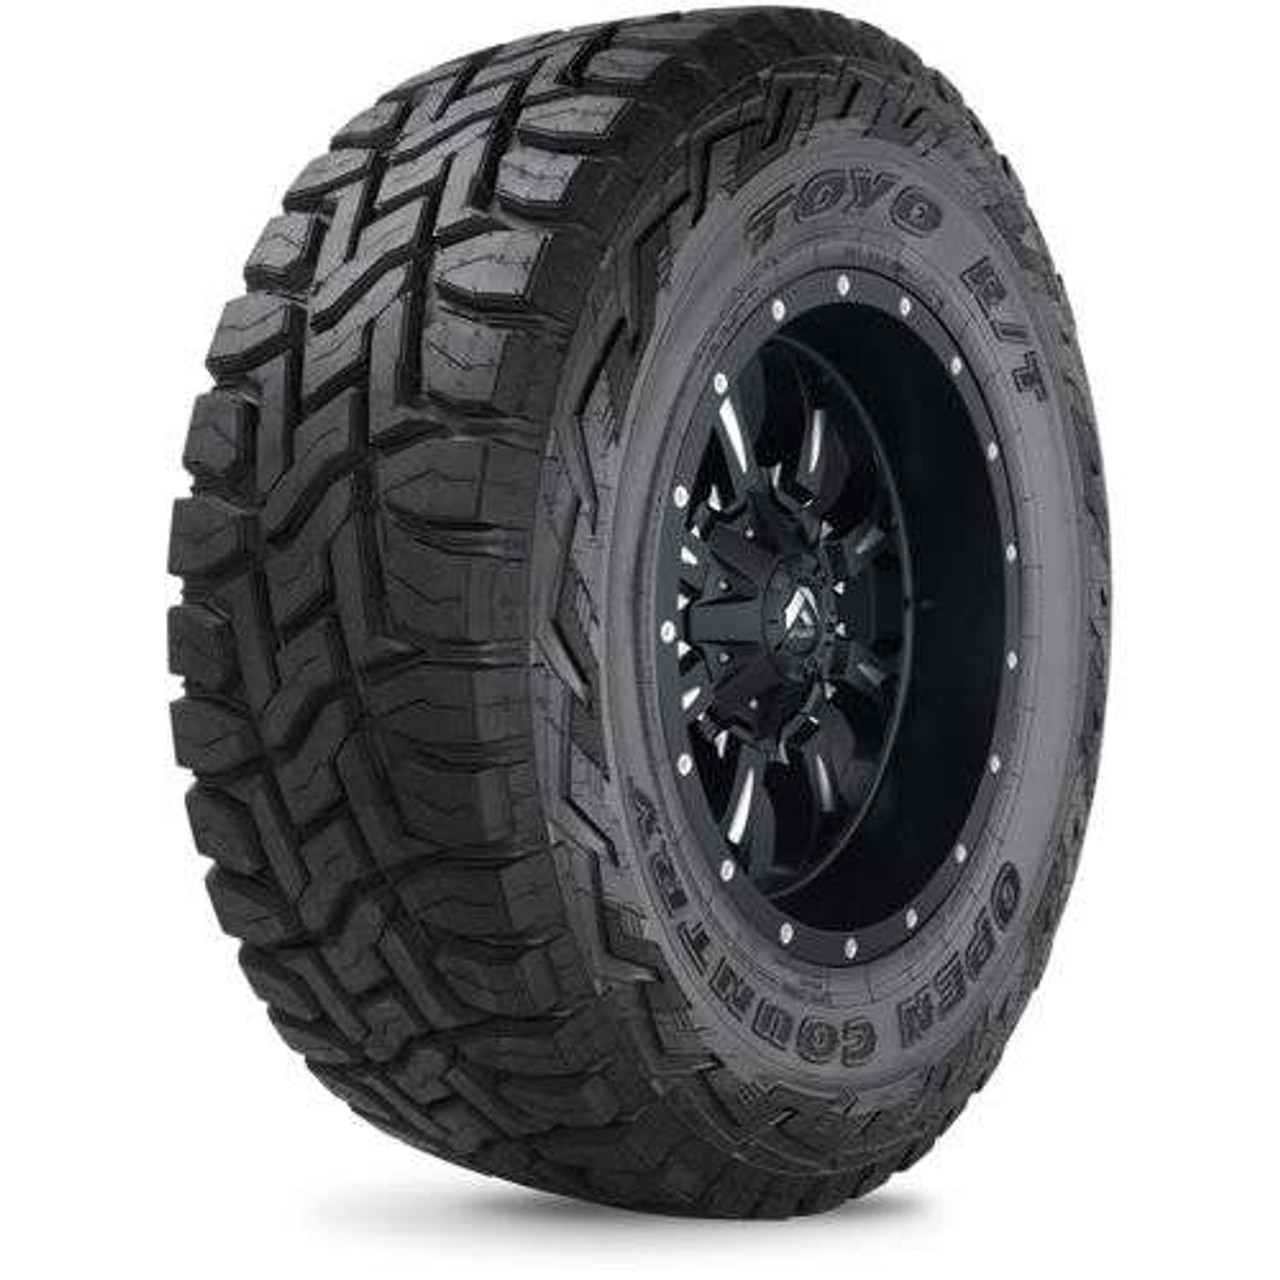 Toyo Open Country RT 31x10.50R15 Tires | 351360 | 31 10.50 15 Tire